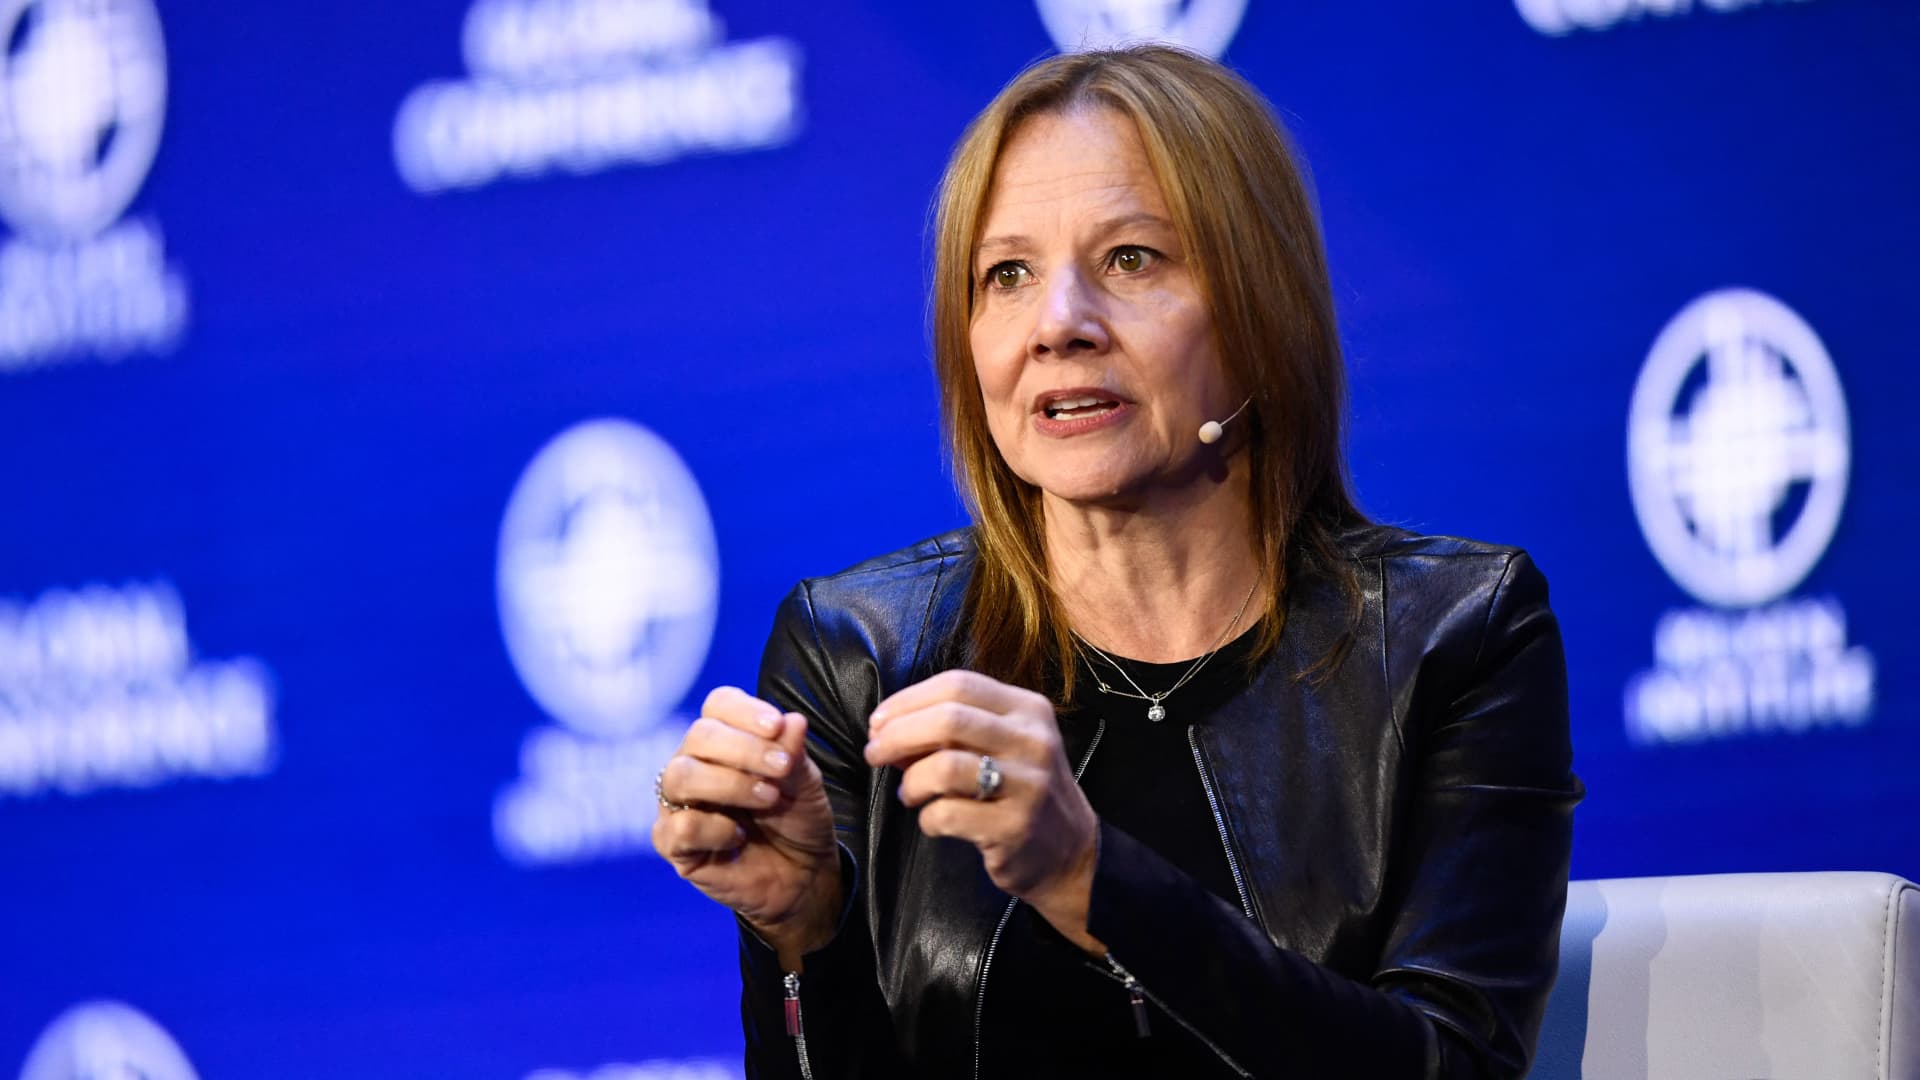 GM’s stock closes below IPO price for first time since October 2020